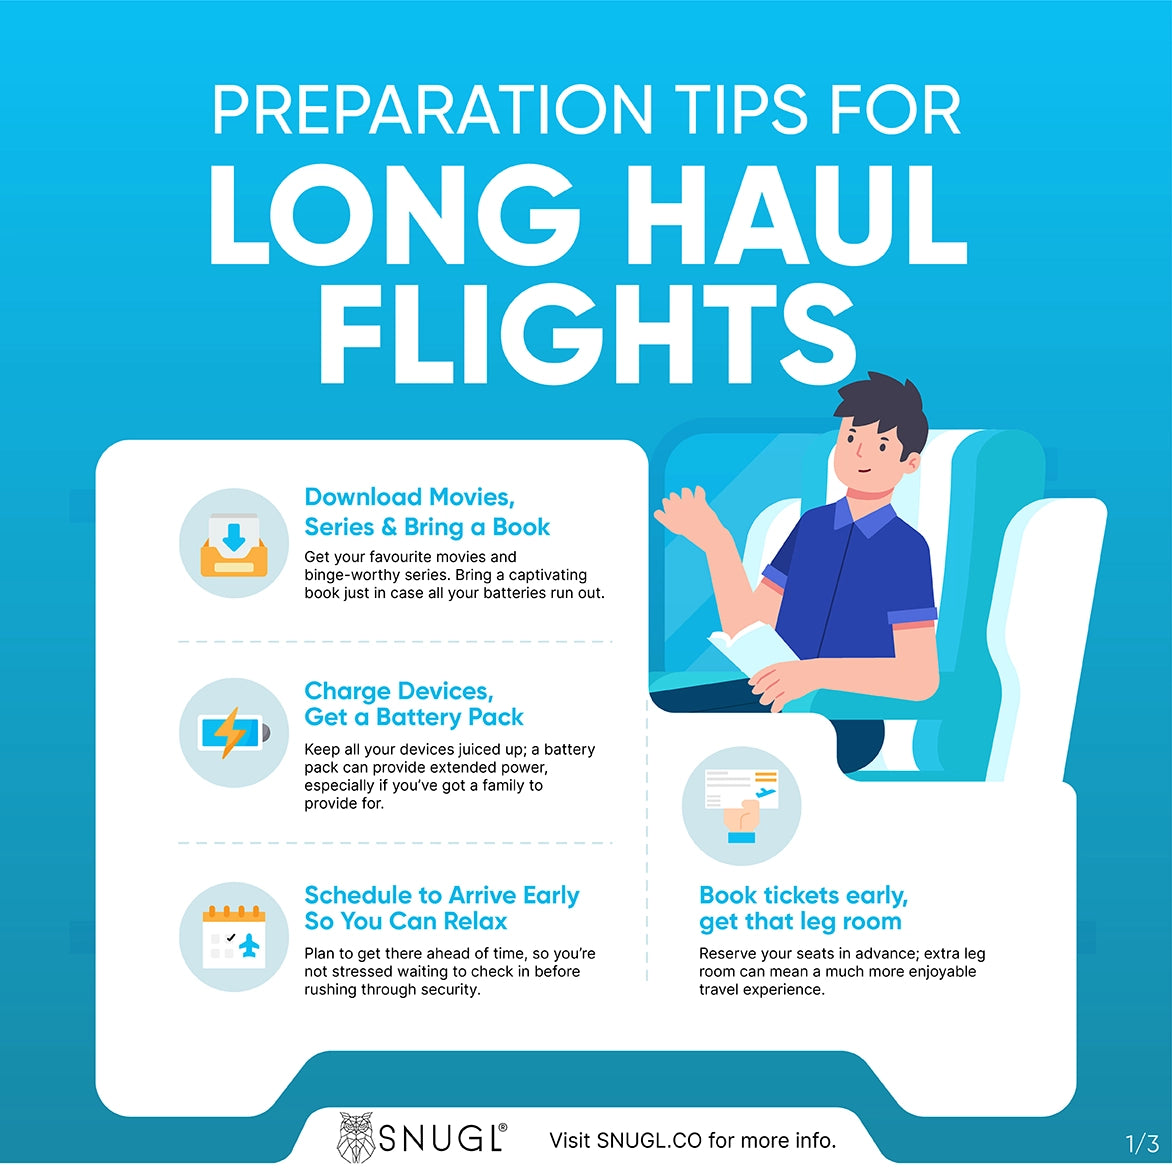 How to Survive a LONG HAUL FLIGHT from a Frequent Flyer 